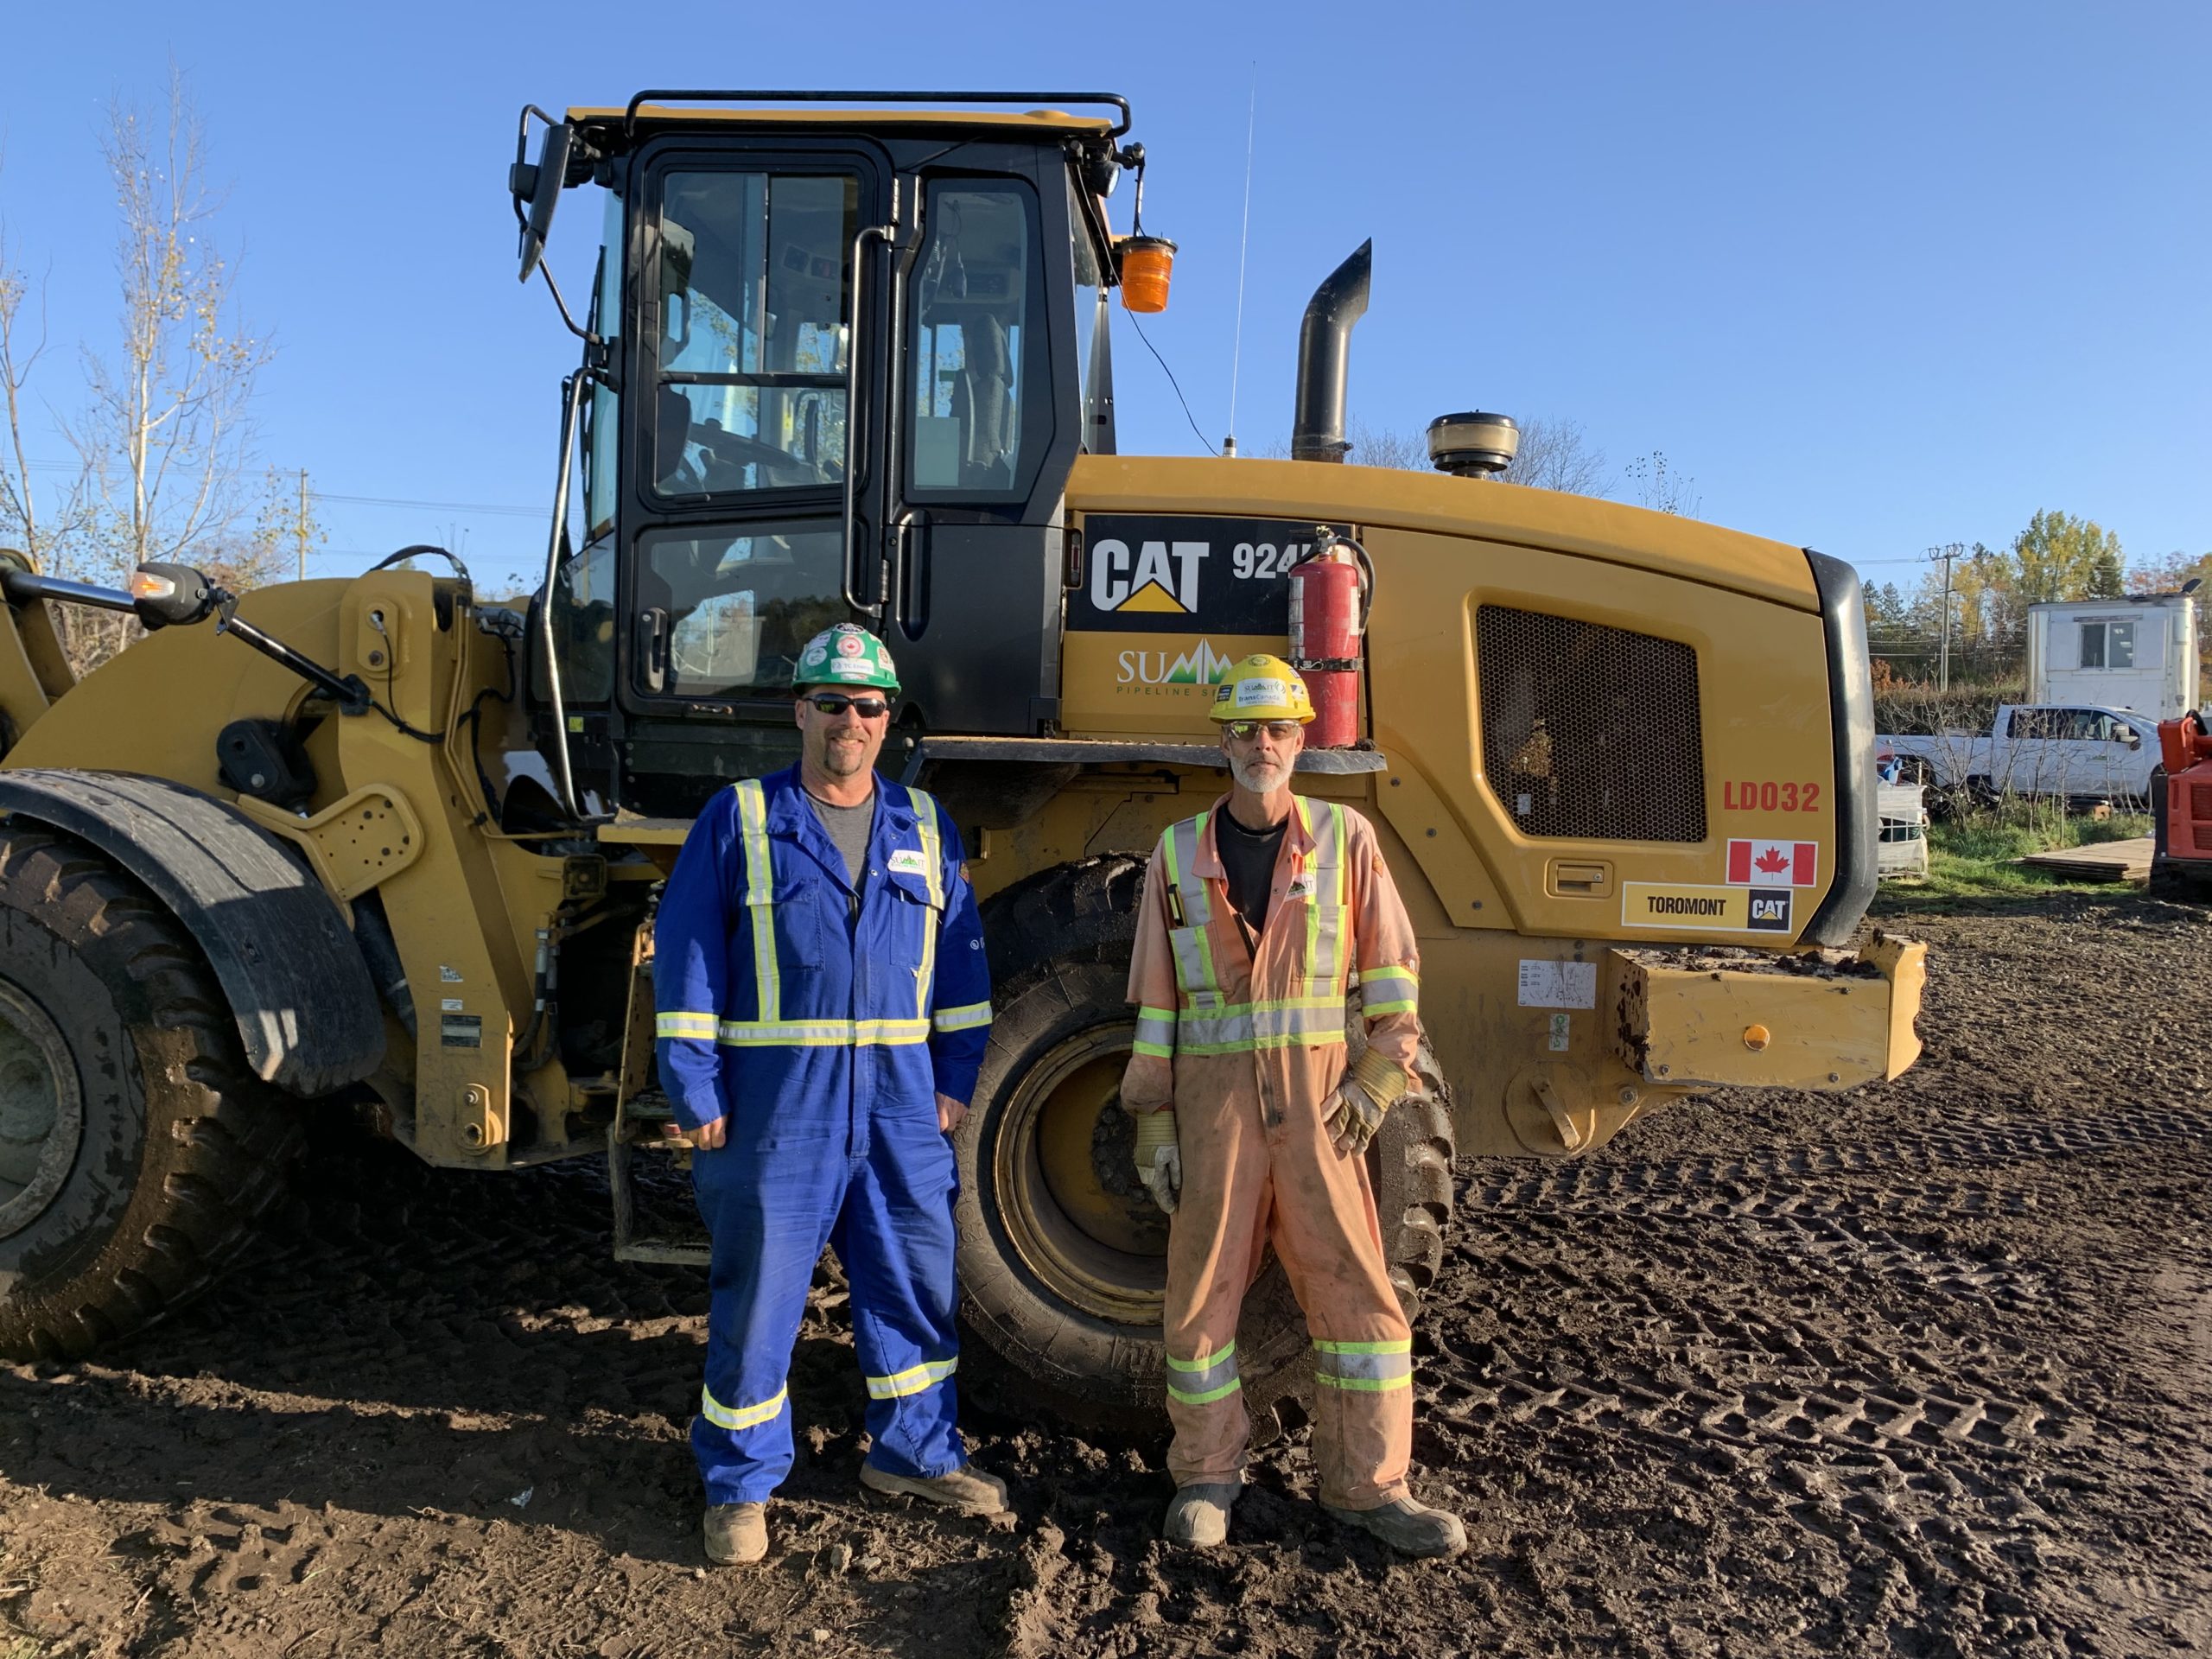 Local 793 members Dean Dobson and Chris Pettipas standing in front of a Cat 924 loader.